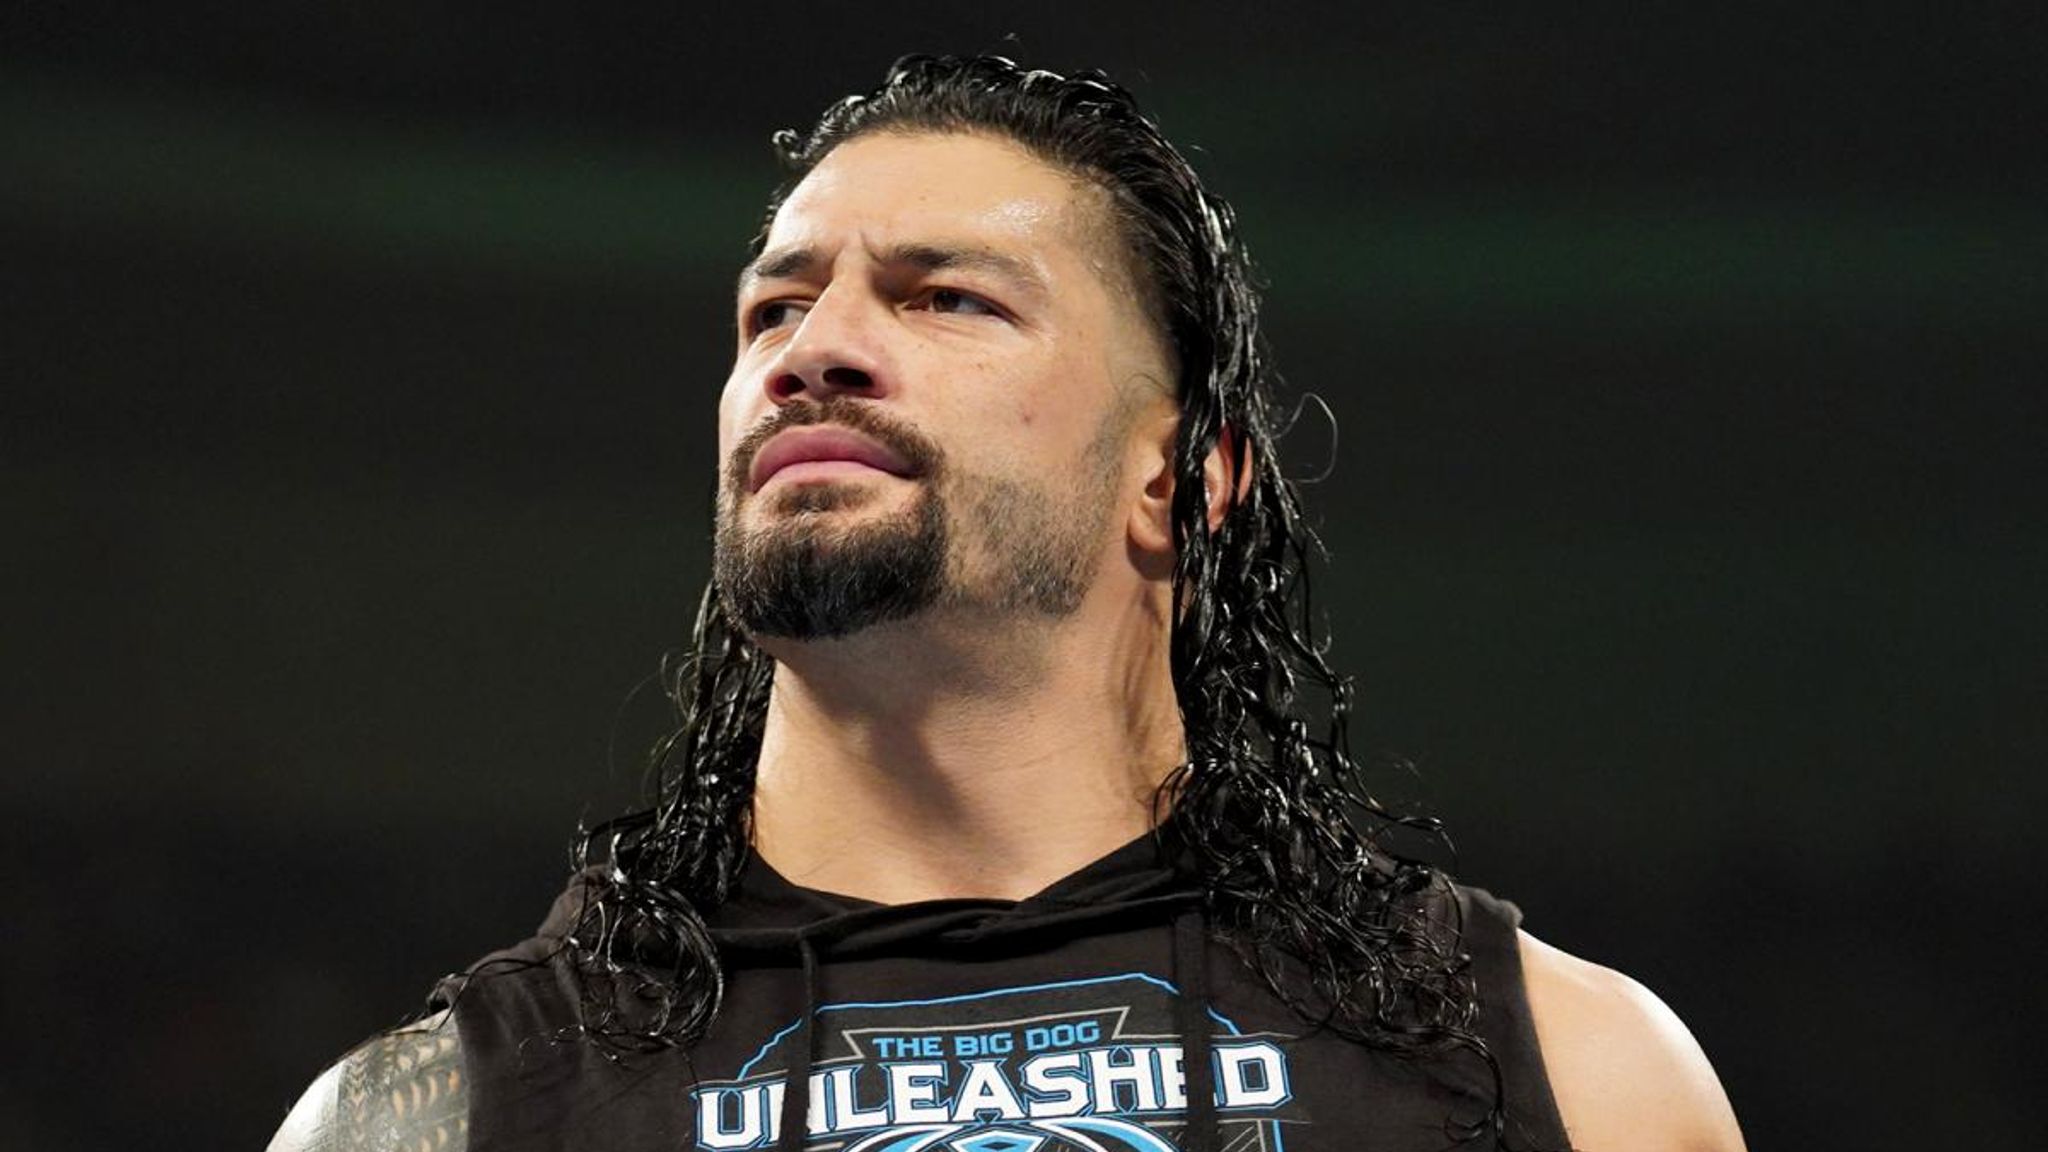 Pin by Roman Reigns on Roman Reigns best pic | Reign hairstyles, Roman  reigns smile, Roman reigns shirtless